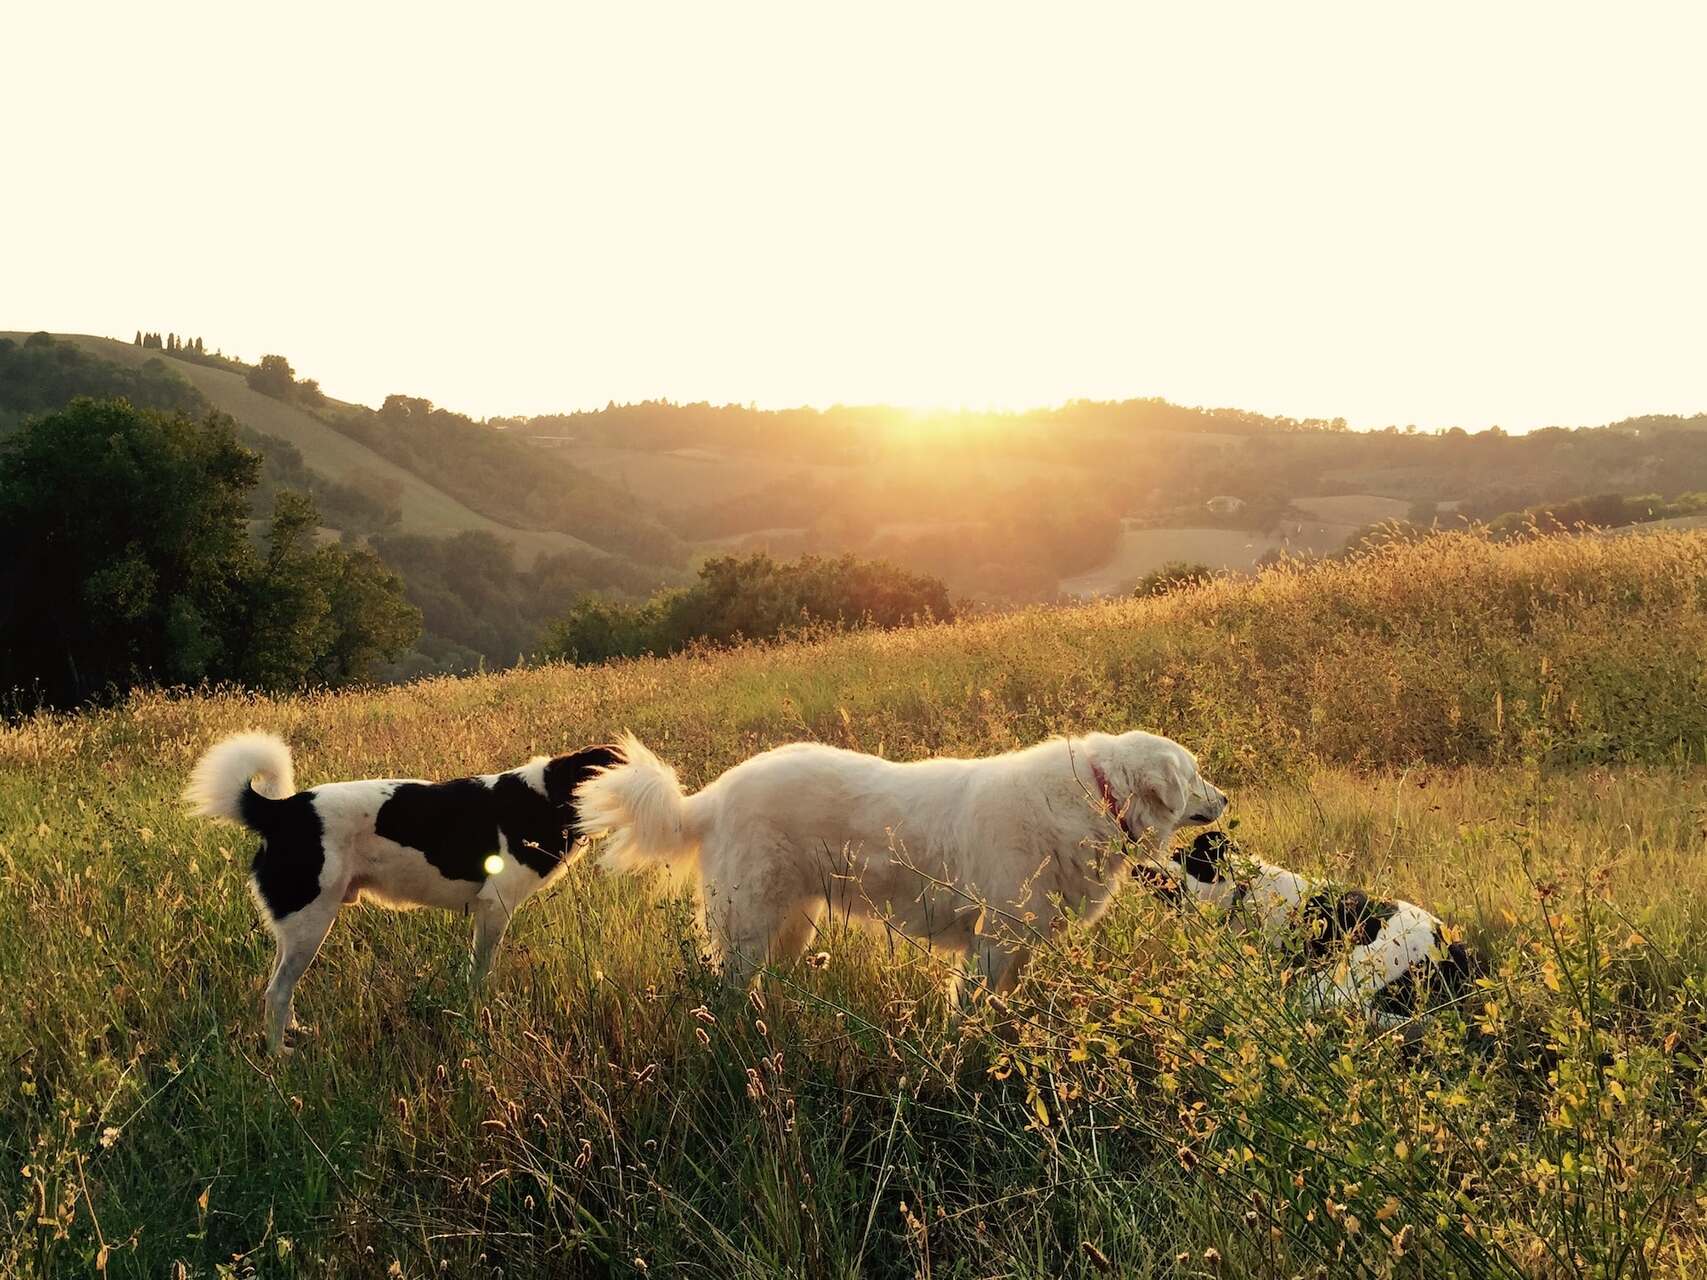 Three dogs in a grassy field watching the sunset